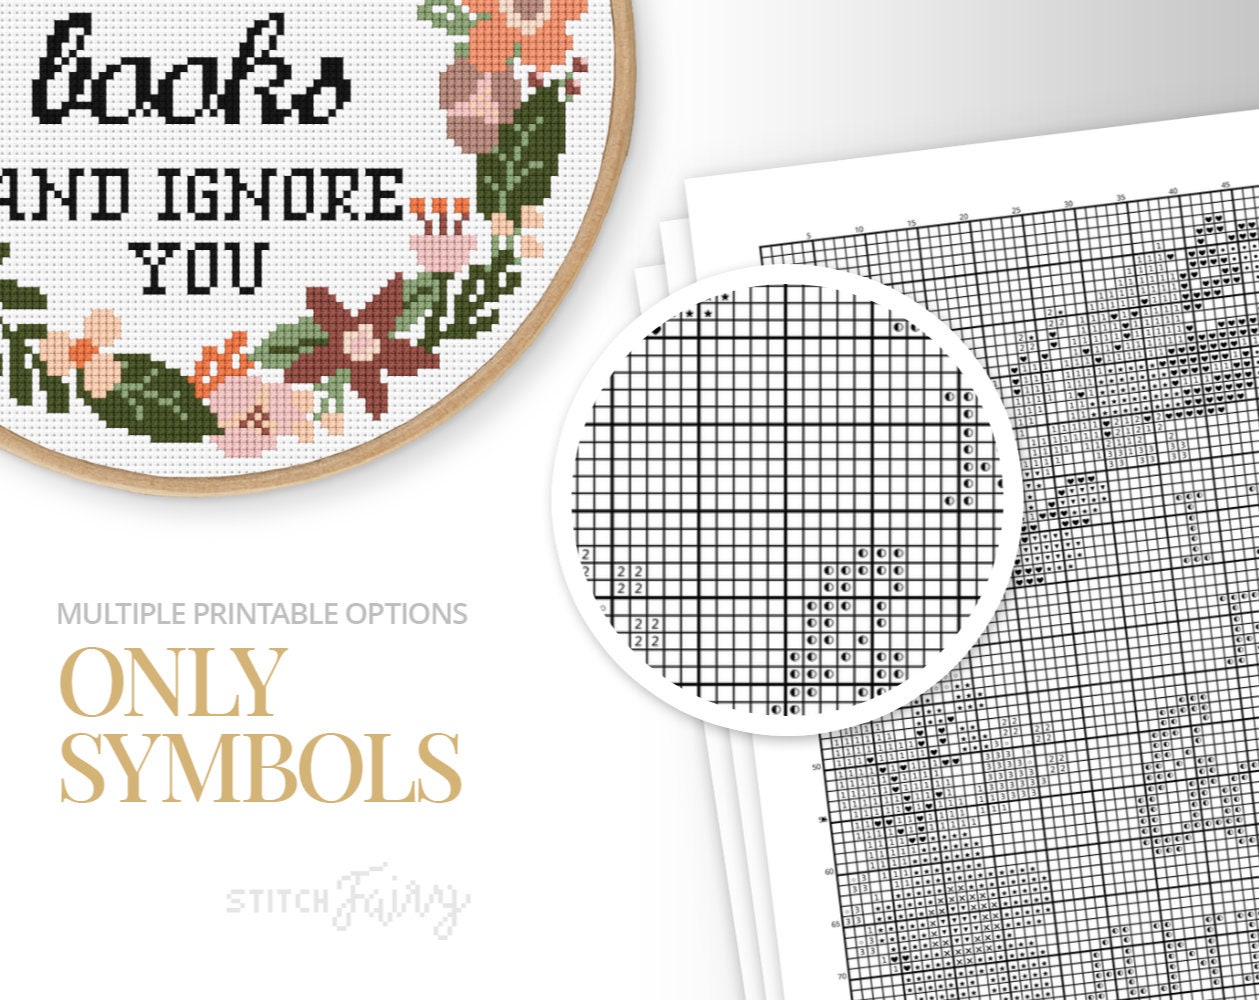 I will read books and ignore you - Cross stitch pattern – Cross